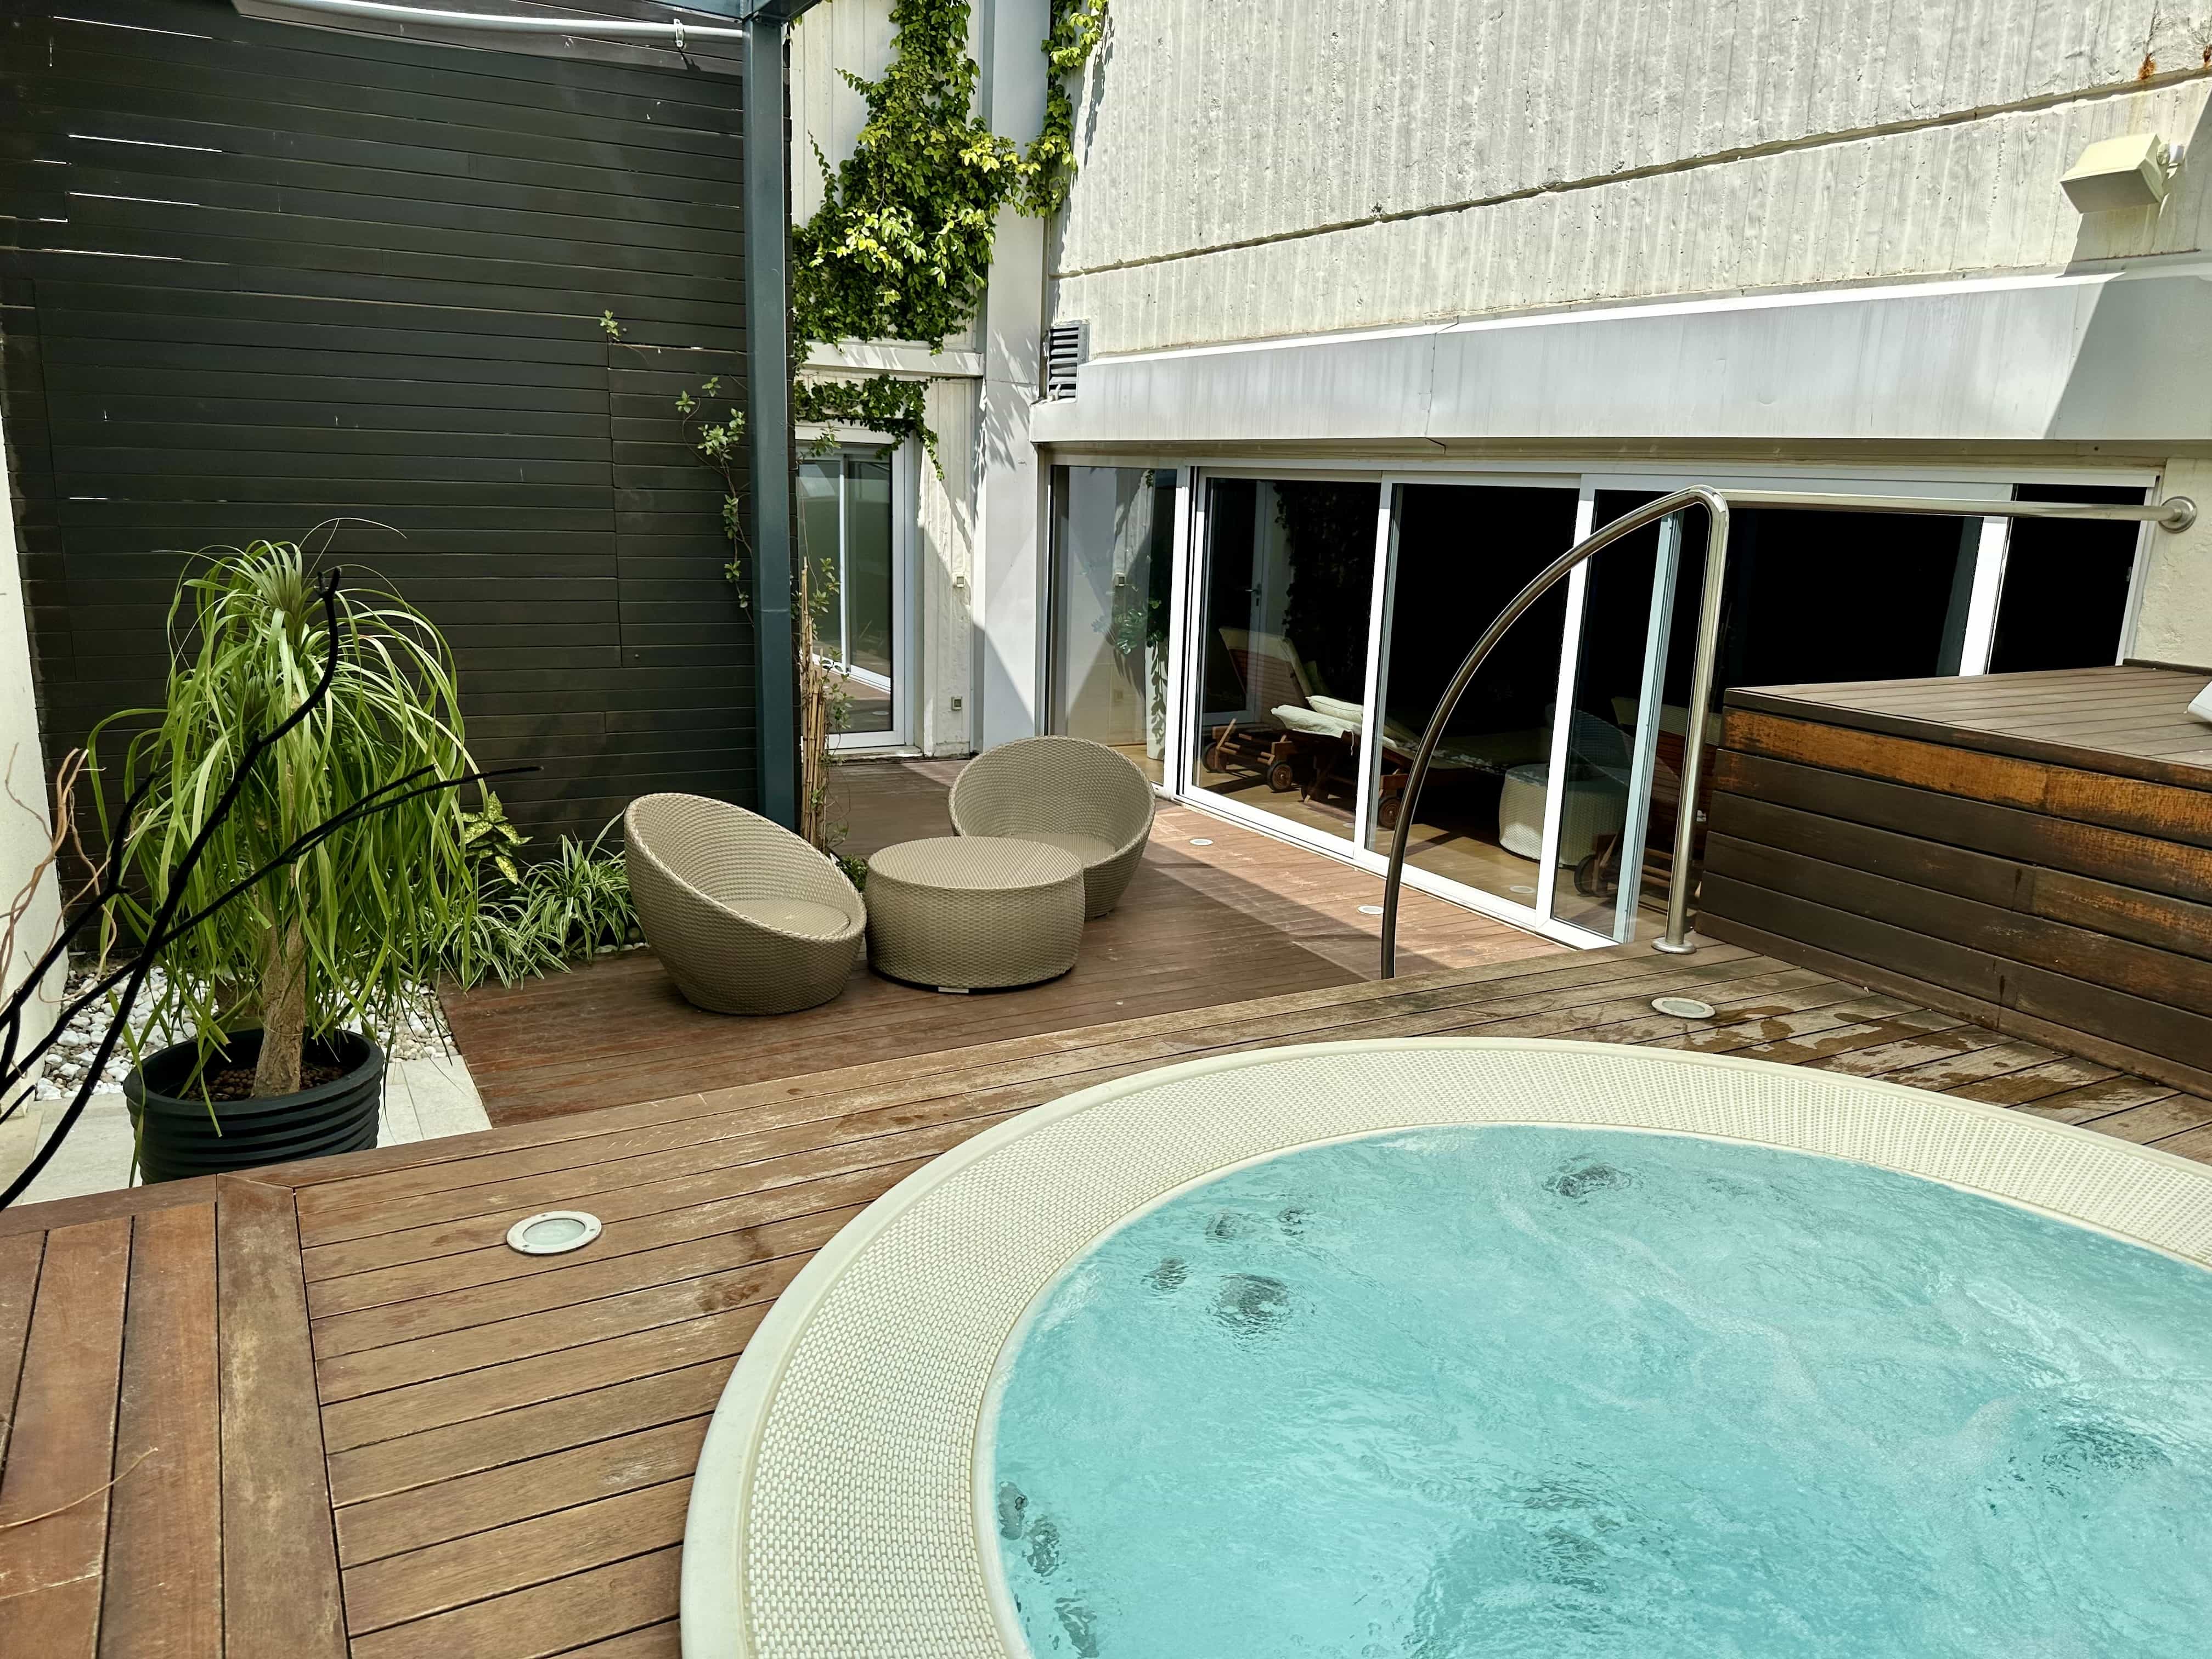 A small jacuzzi in a covered outdoor space, with planters and seating nearby